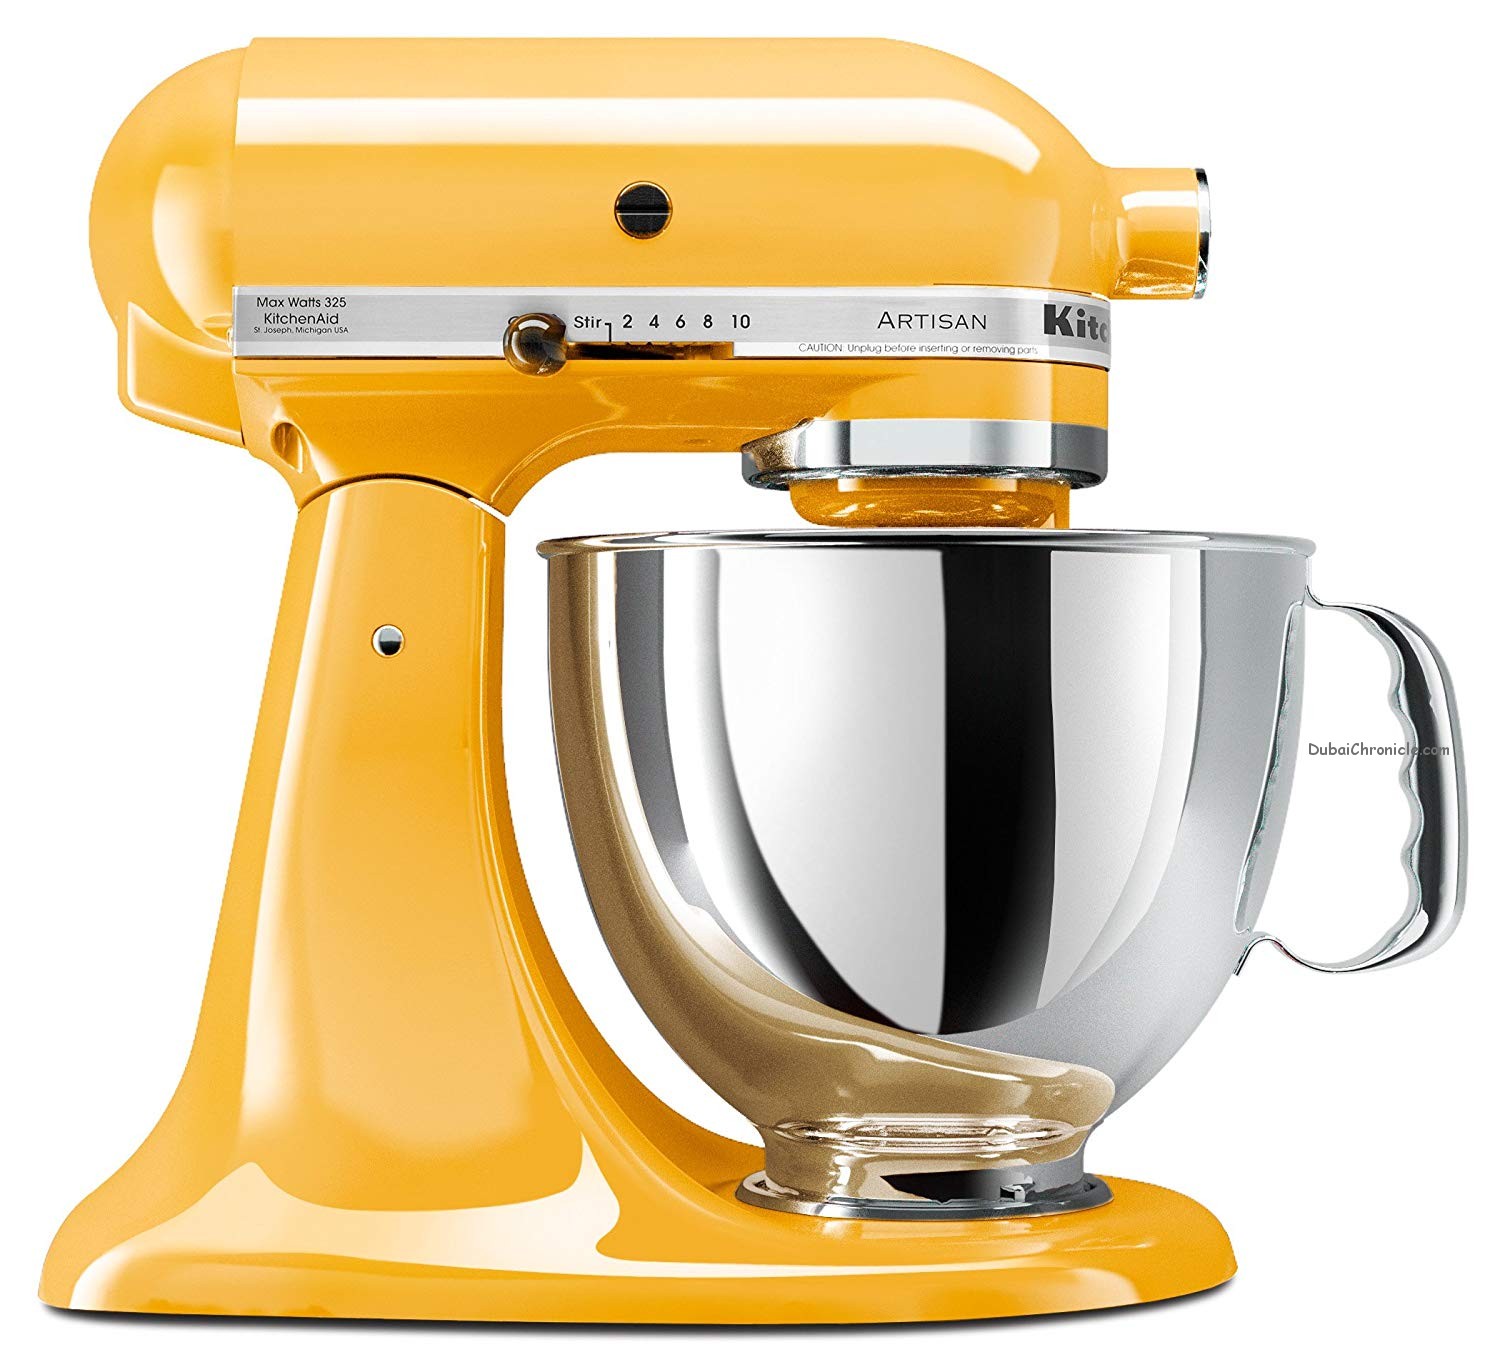 Best Black Friday Deal on KitchenAid Mixer in Yellow